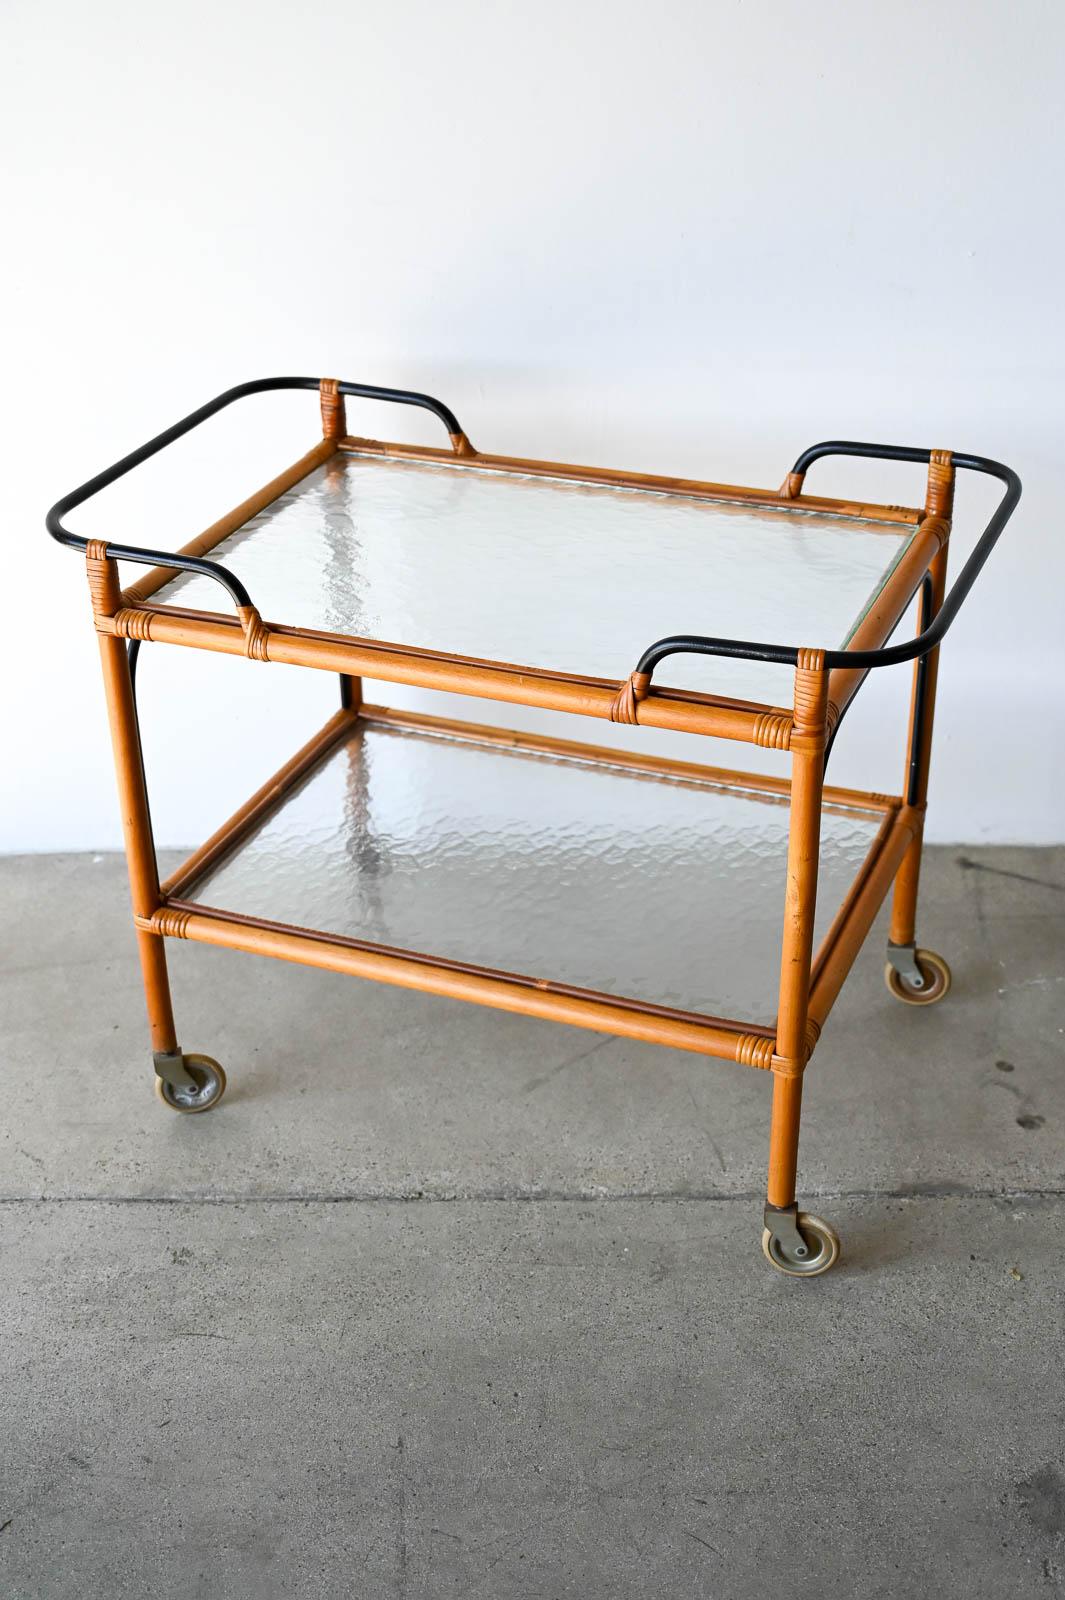 Mid-20th Century Adrian Audoux and Frida Minet Bamboo Iron and Glass Bar Trolley, ca. 1950 For Sale